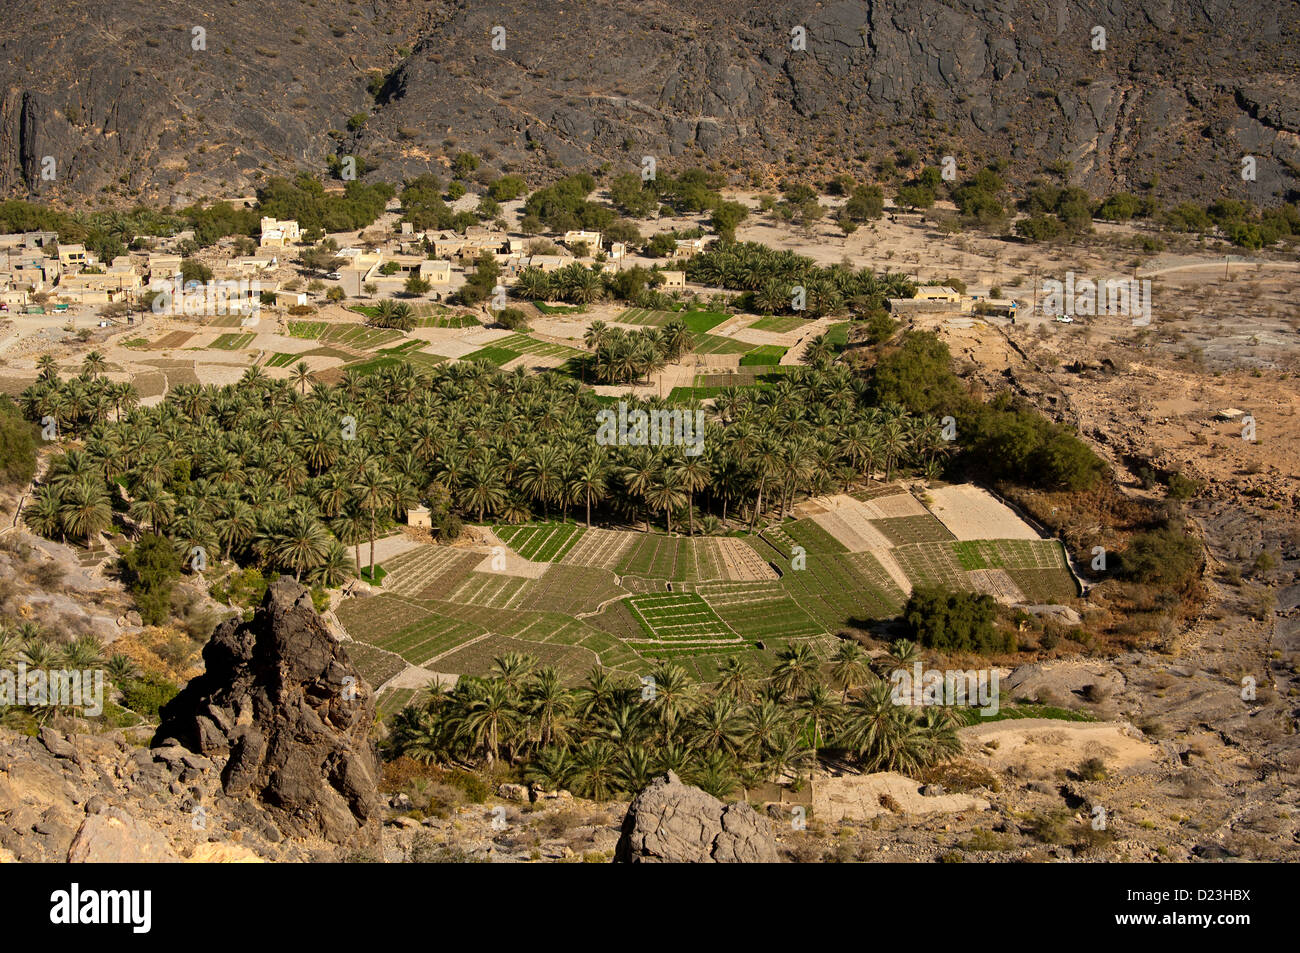 View from above on irrigated plots and palm groves at the oasis Haat in a valley of the Al Hajar mountains, Sultanate of Oman Stock Photo